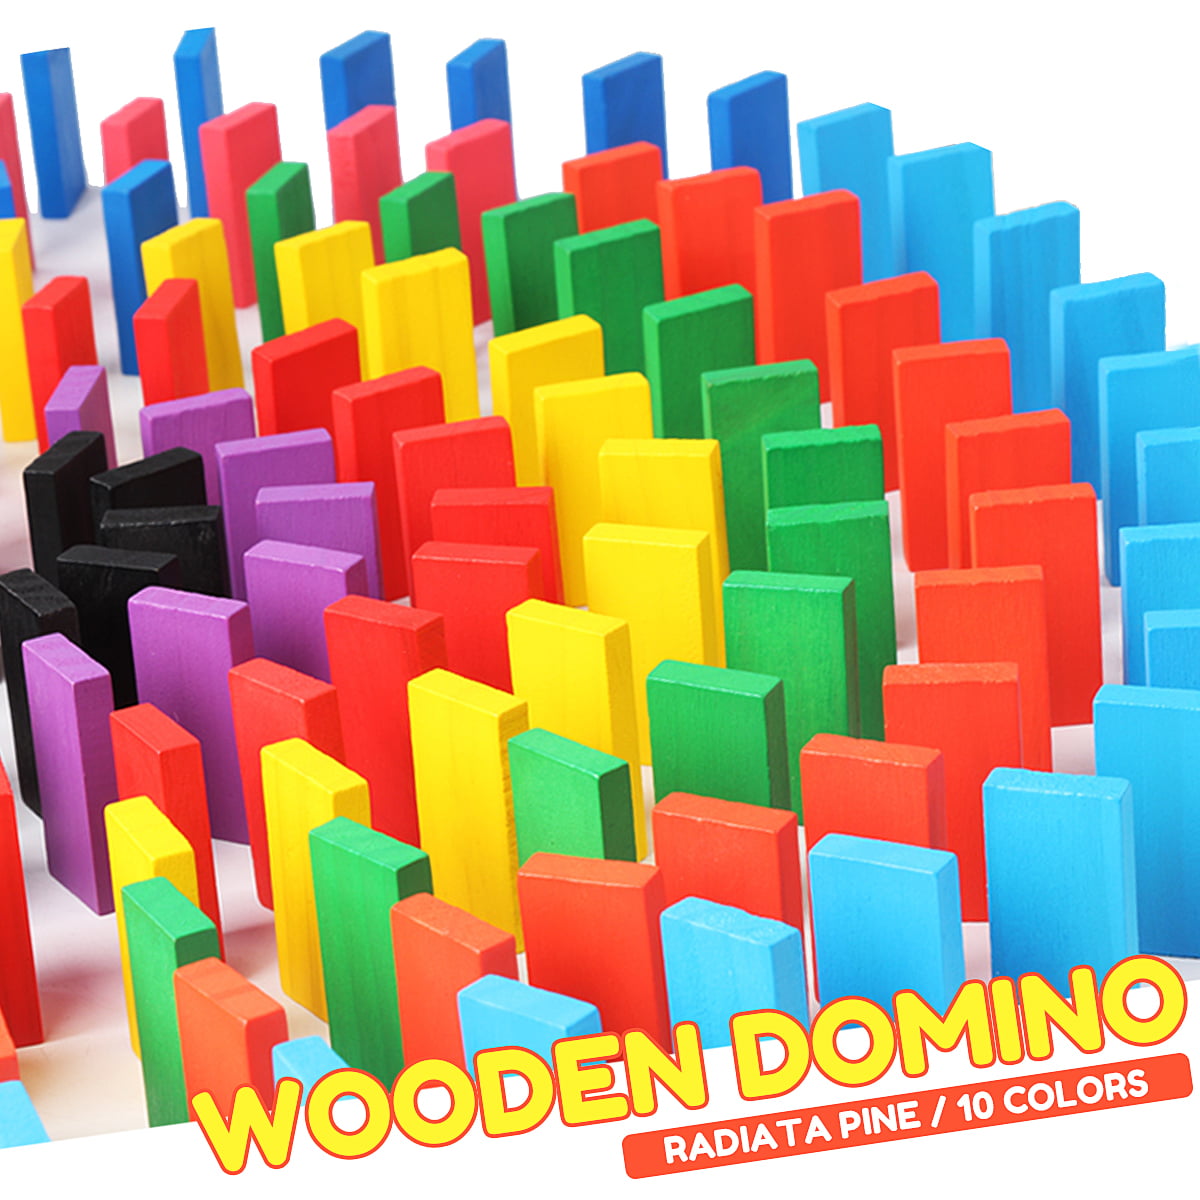 240PCS Wooden Domino Toy Dominos Building Blocks Game Gift 12 Color 